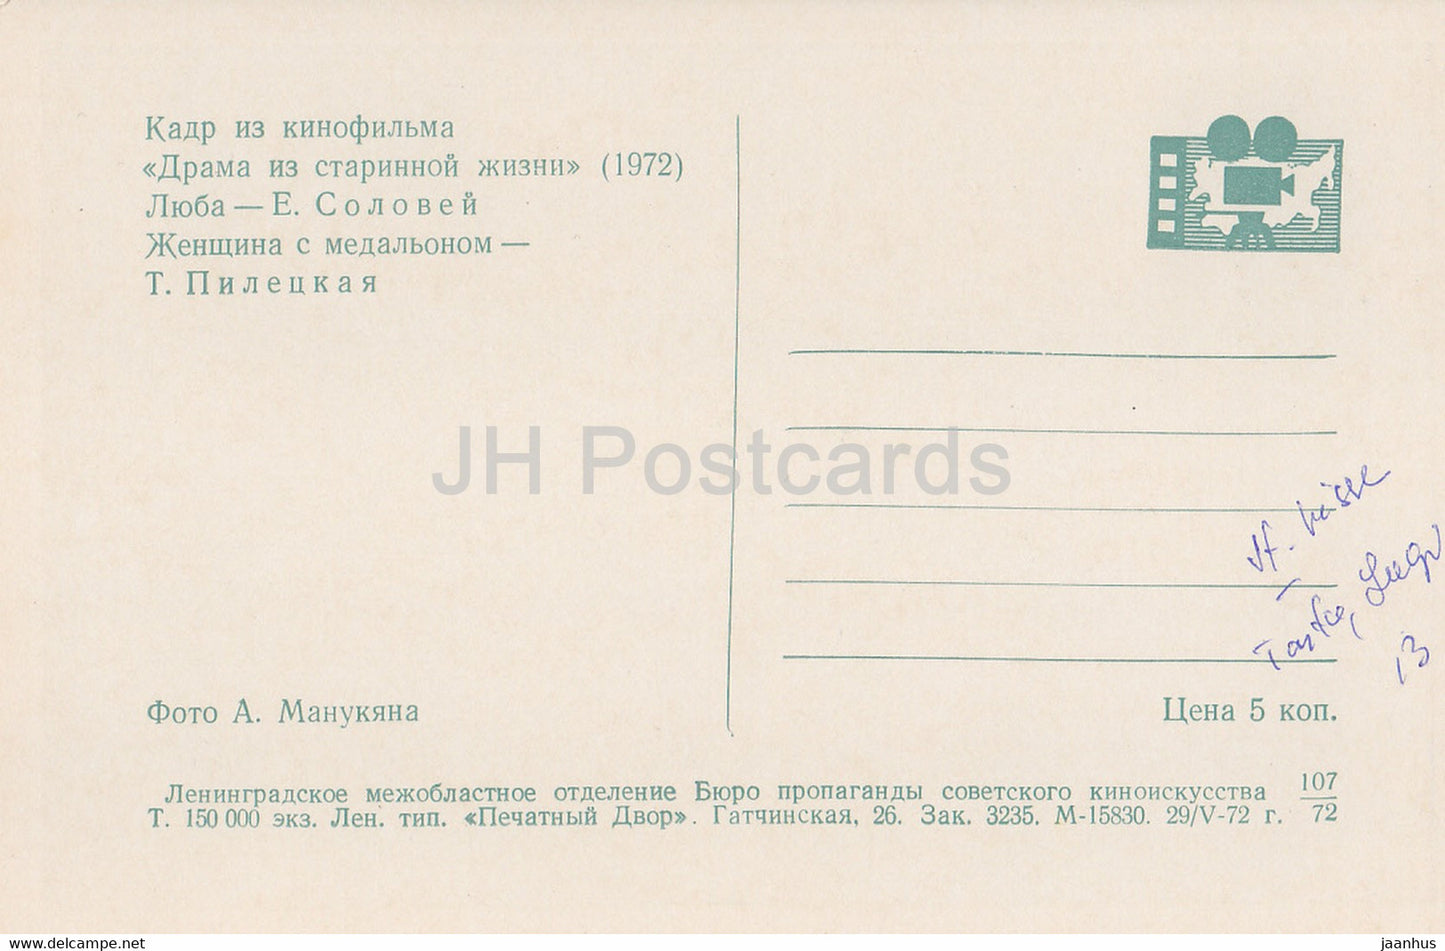 Drama from Ancient Life - actress E. Solovey and T. Piletskaya - Movie - Film - soviet - 1972 - Russia USSR - unused